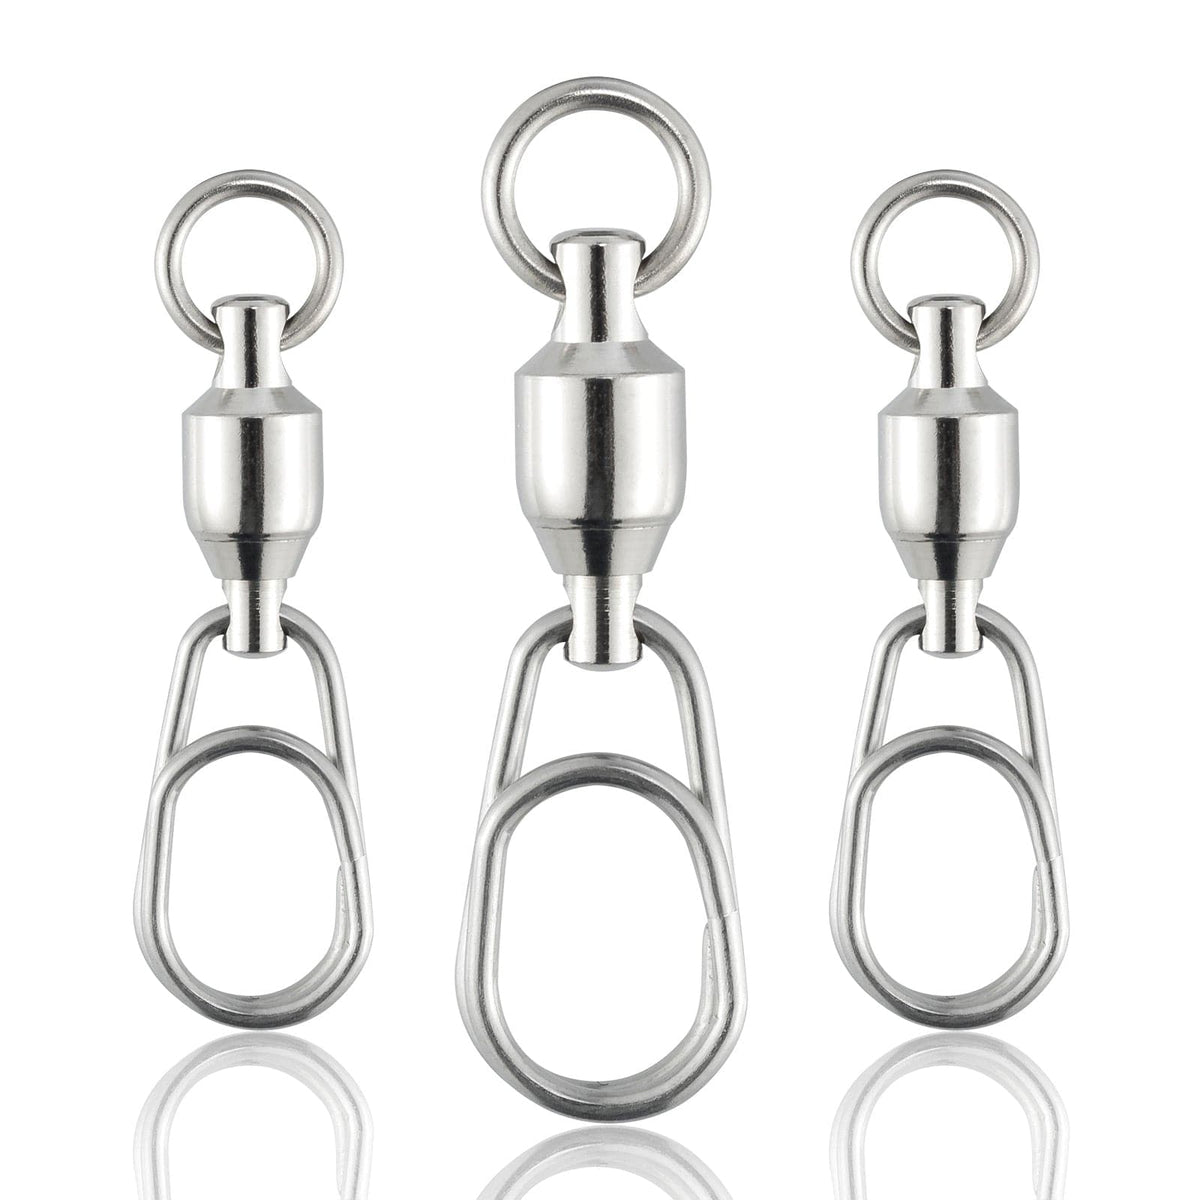 Dr.Fish Stainless Steel Ball Bearing Swivels with Coastlock Snap